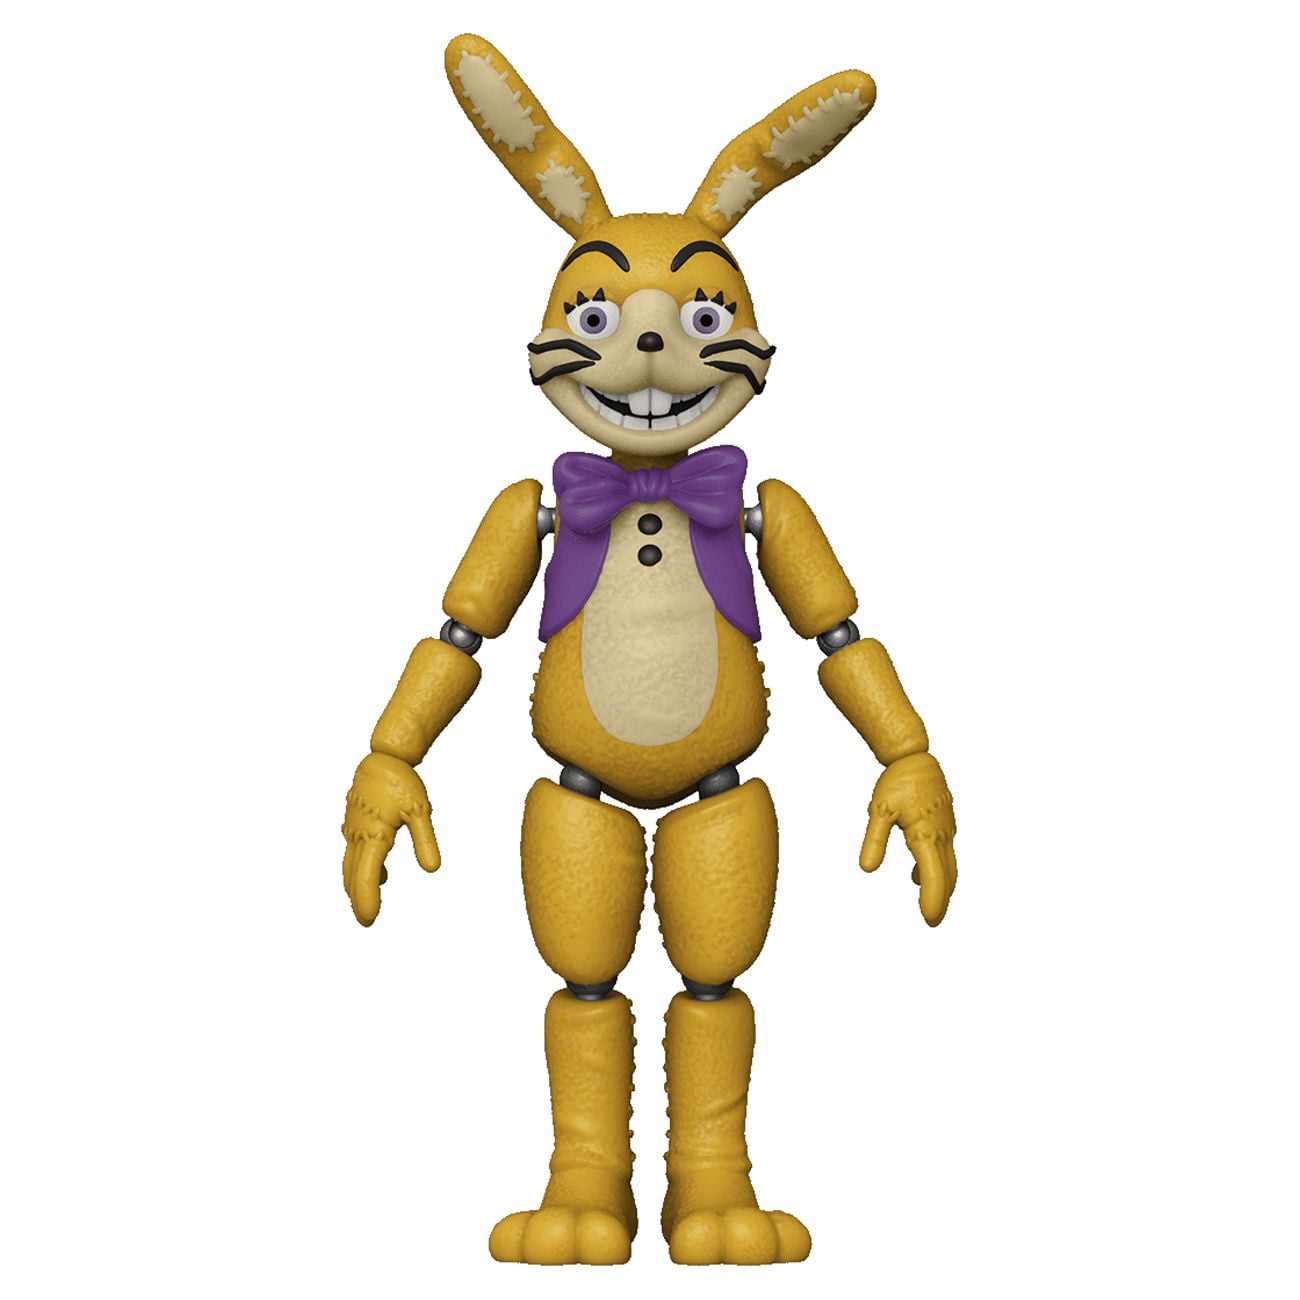 Dress Like Glitchtrap From FNAF, Glitchtrap Costume Guide For